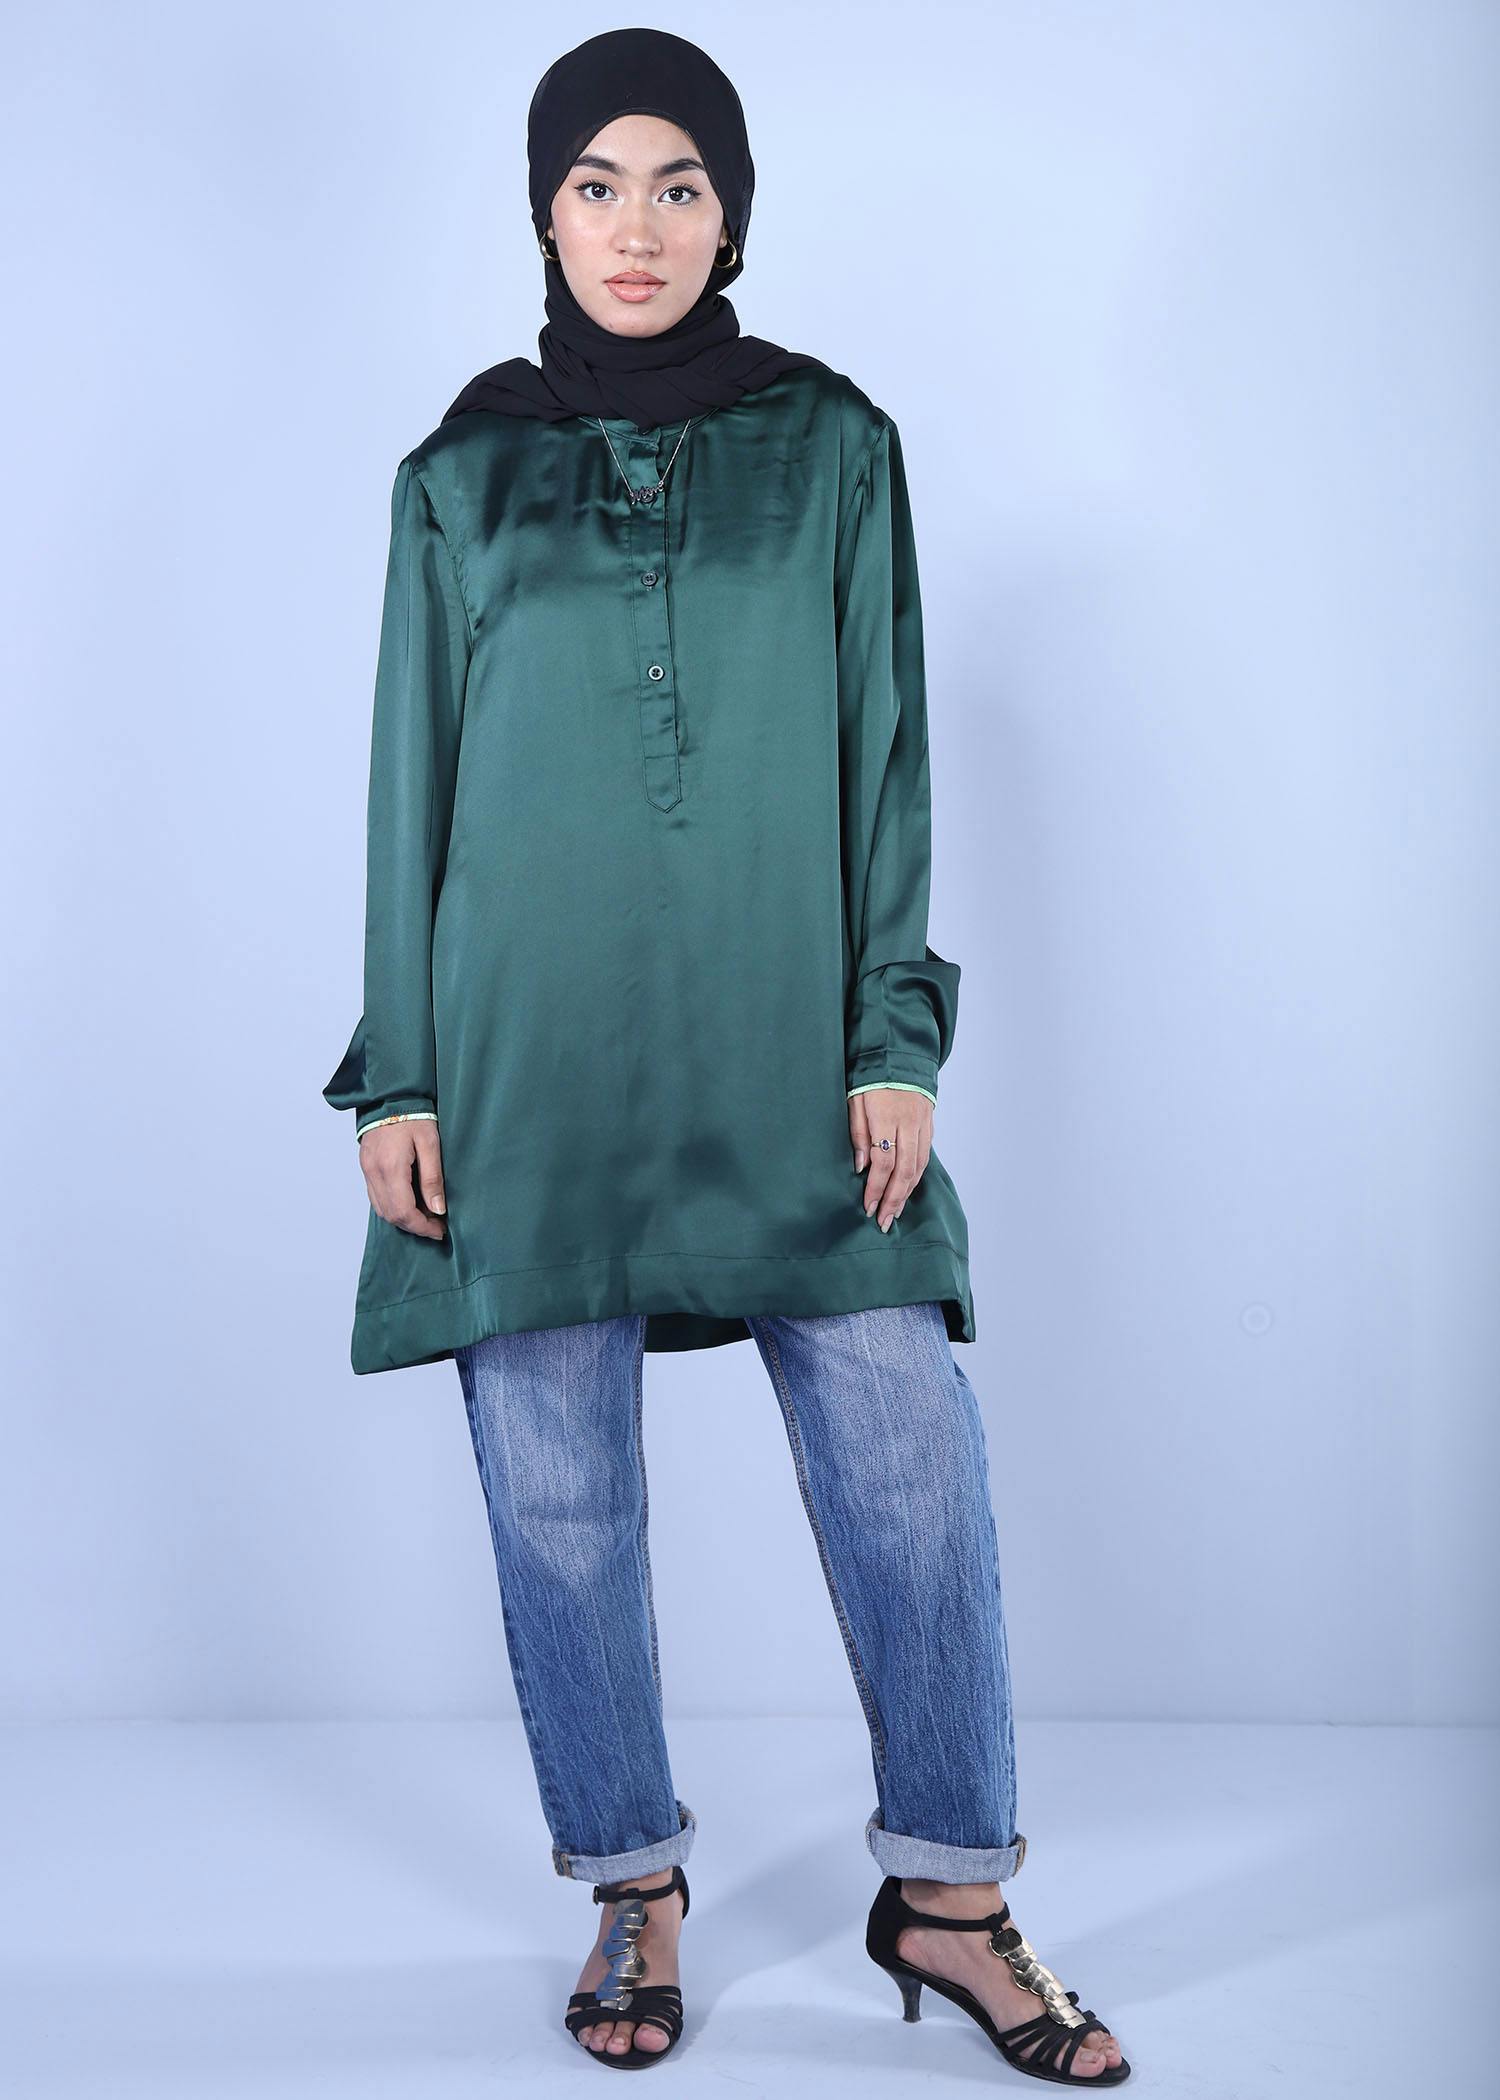 uvaria ladies tops bottle green color full front view